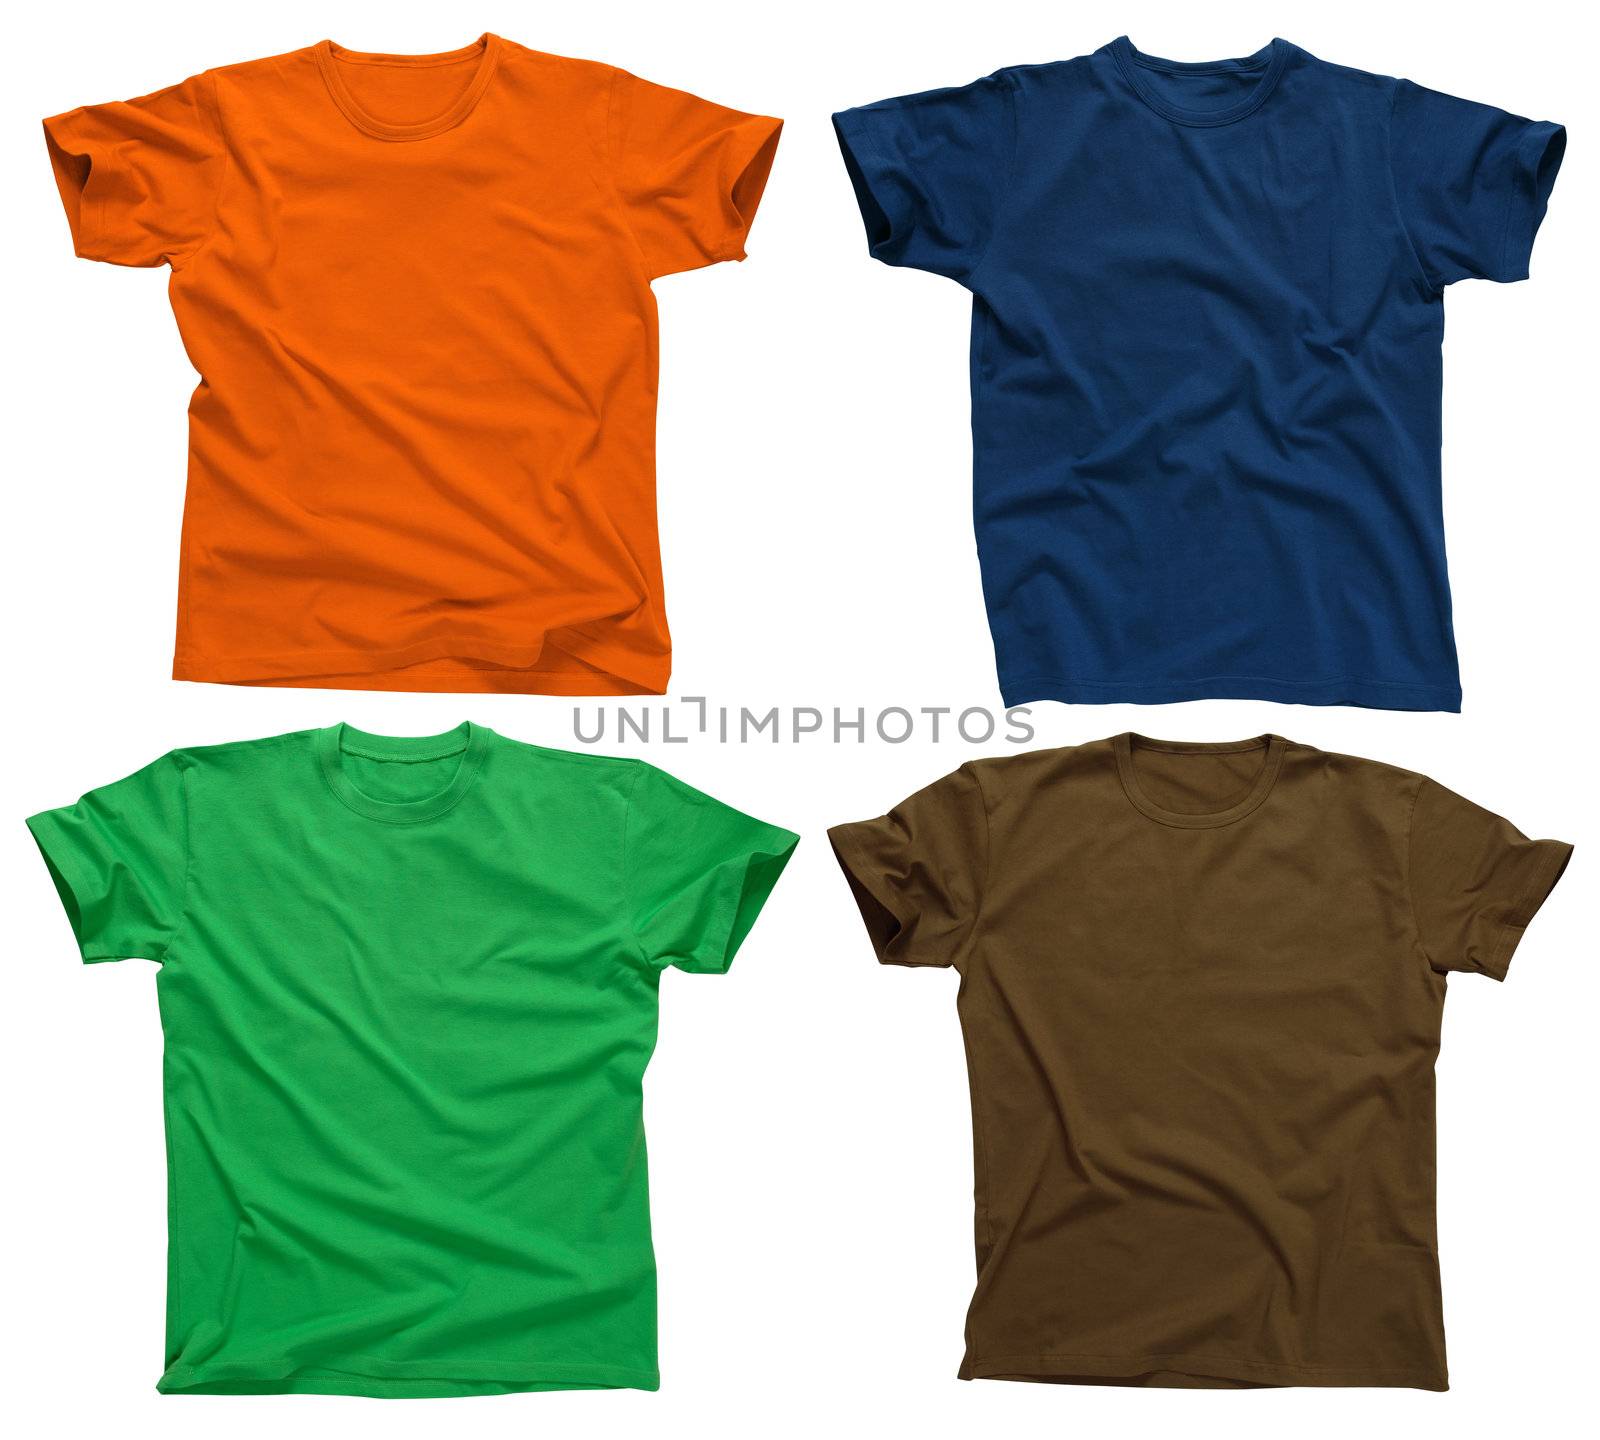 Photograph of four blank t-shirts, green, dark blue, brown, and orange.  Clipping path included.  Ready for your design or logo.
